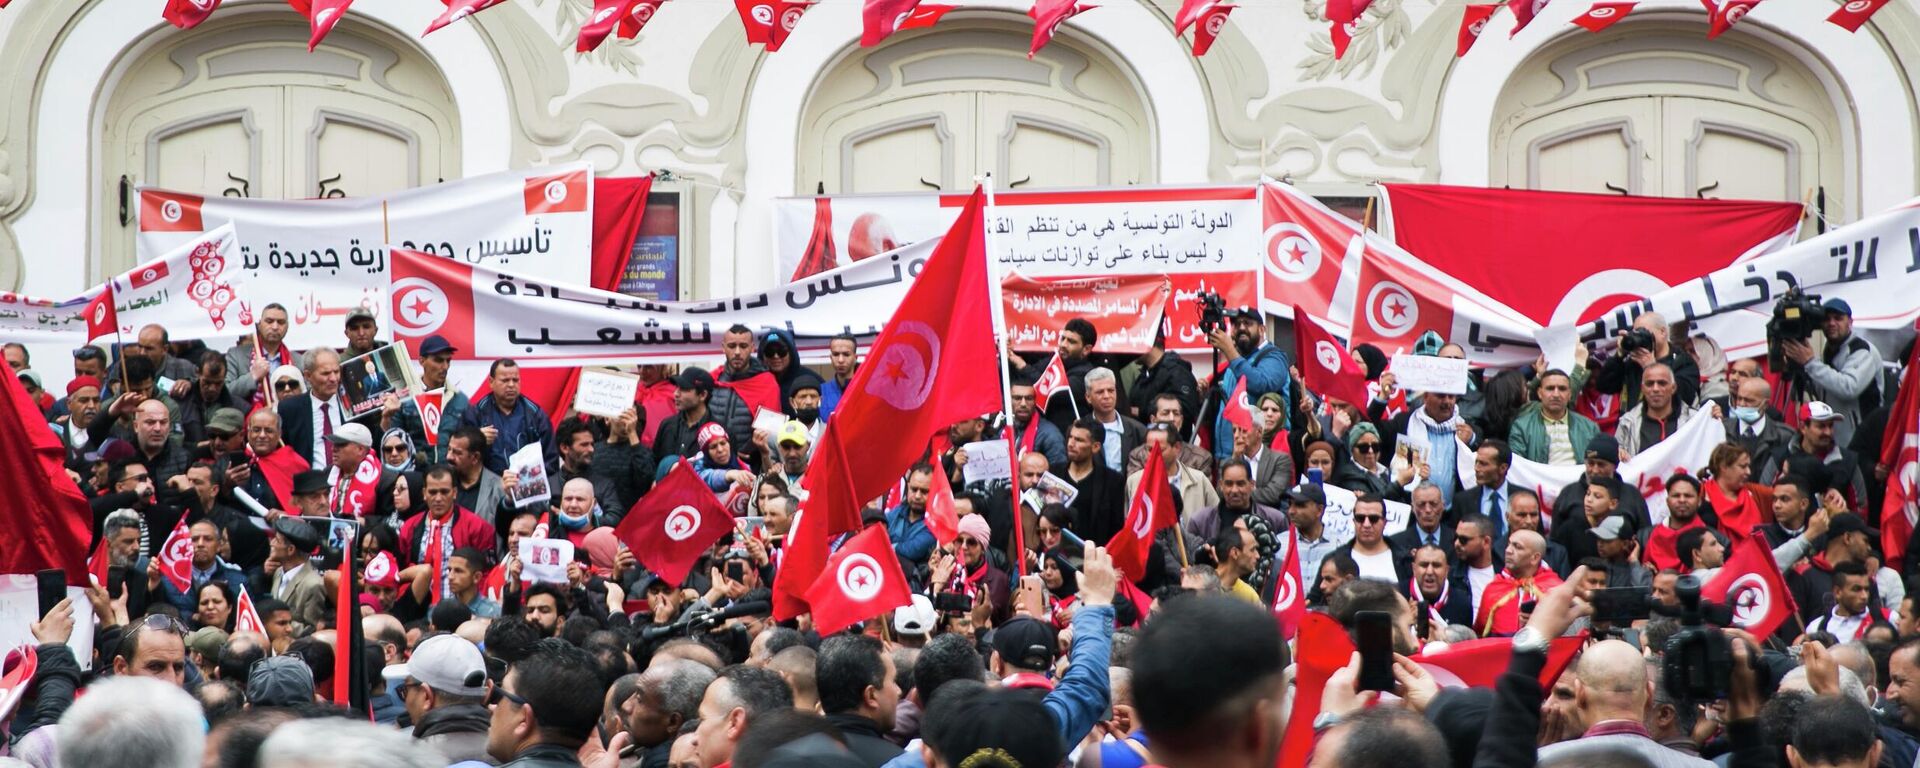 Tunisian demonstrators gather during a rally in support of Tunisian President Kais Saied in Tunis, Tunisia, Sunday, May 8, 2022. - Sputnik International, 1920, 26.07.2022